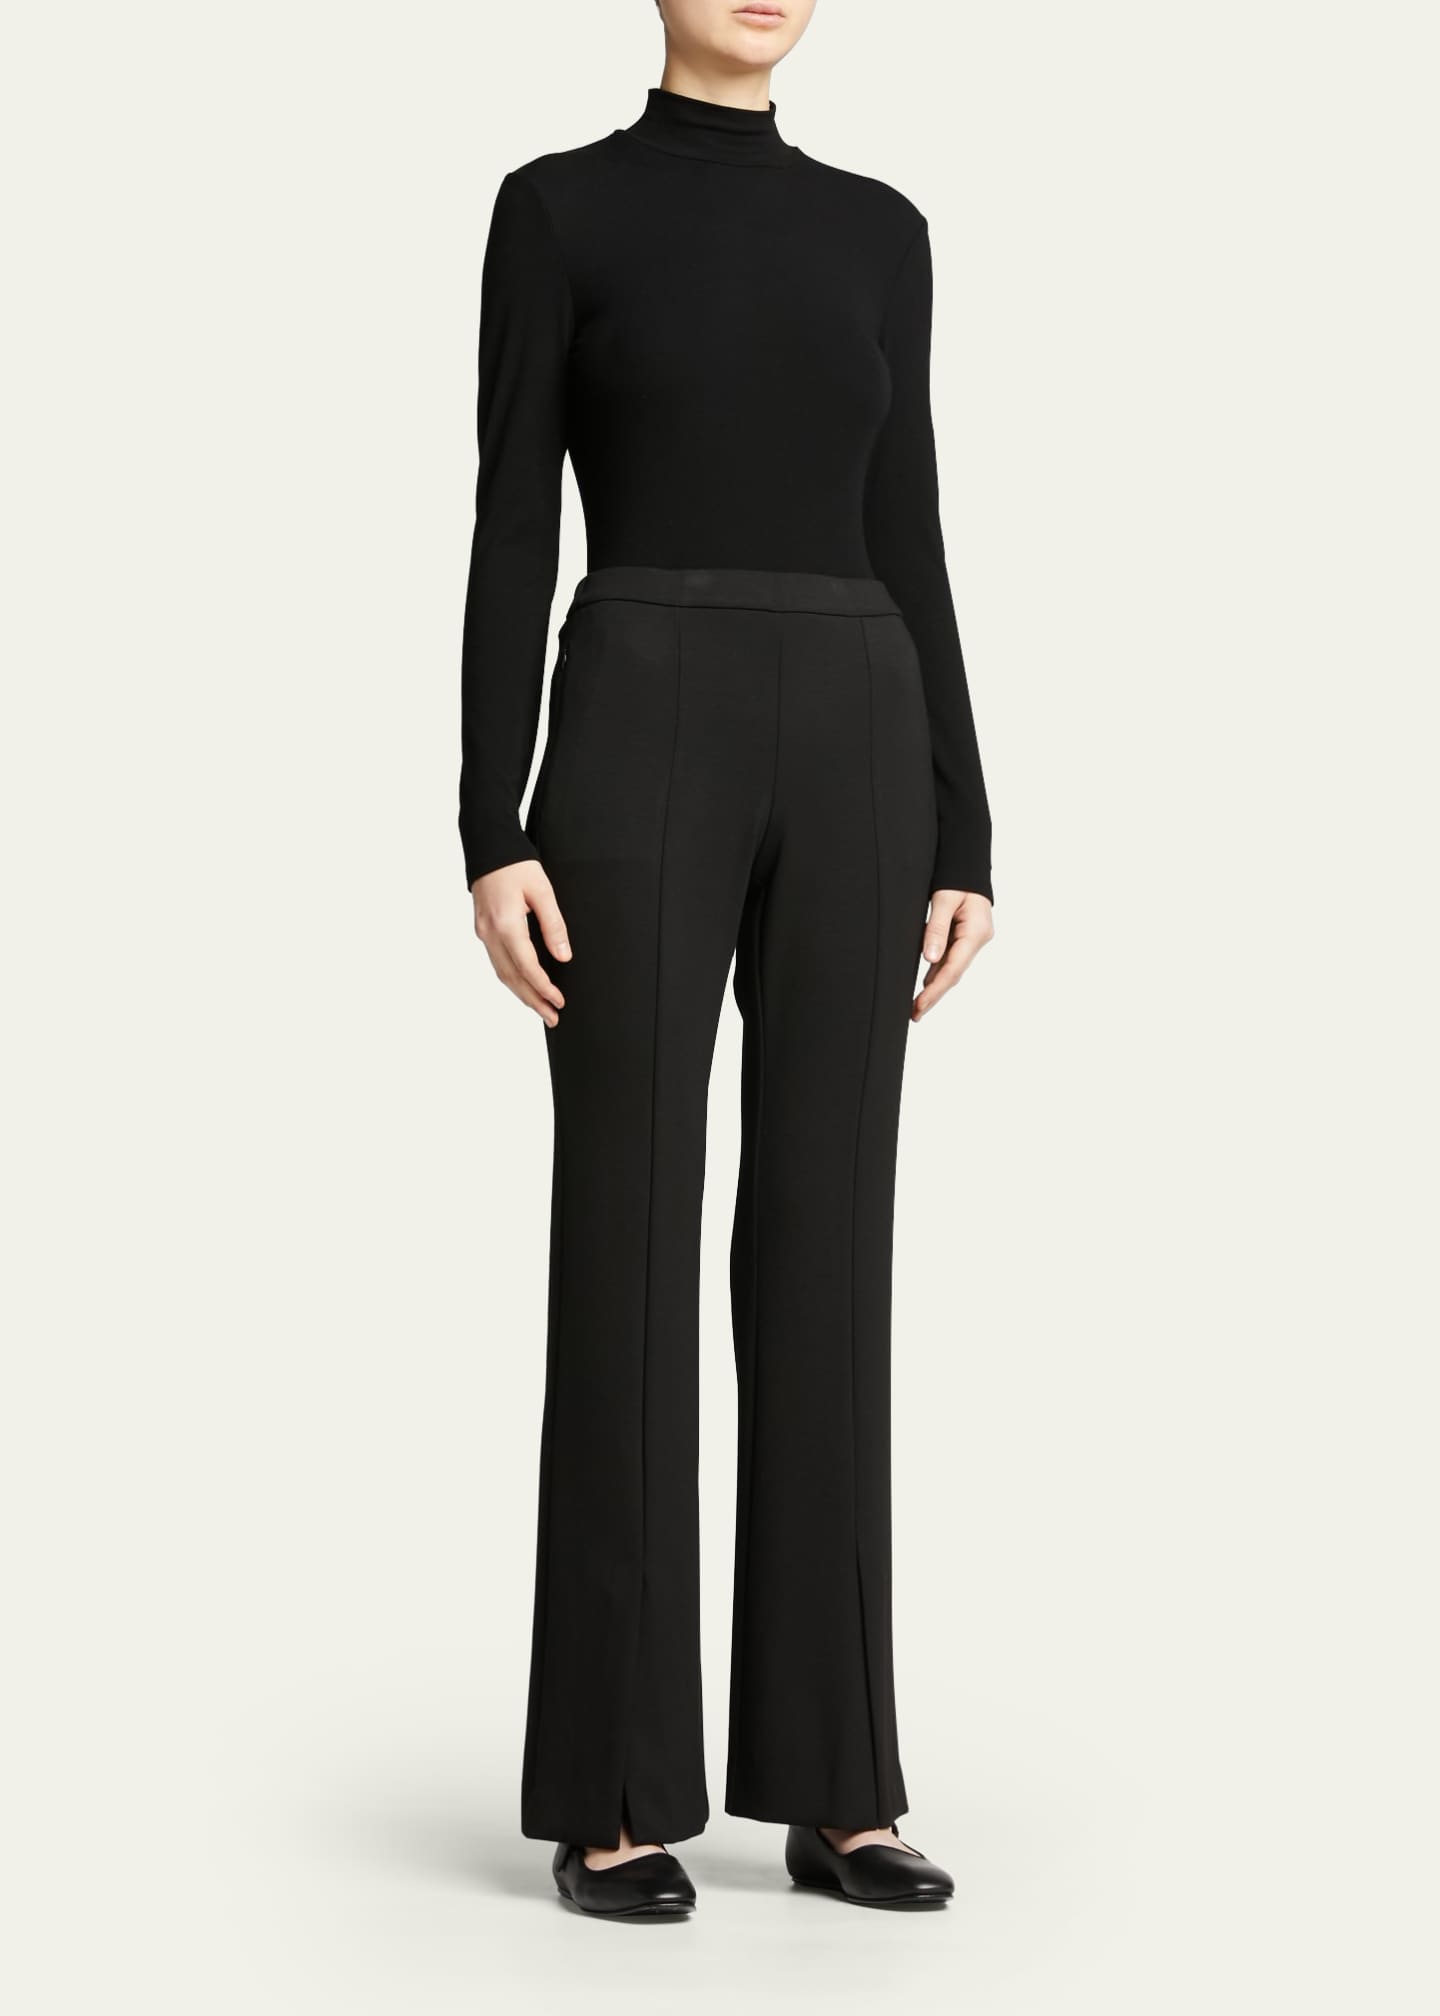 Theory Demitria Flare Double-Knit Vented Pants - Bergdorf Goodman